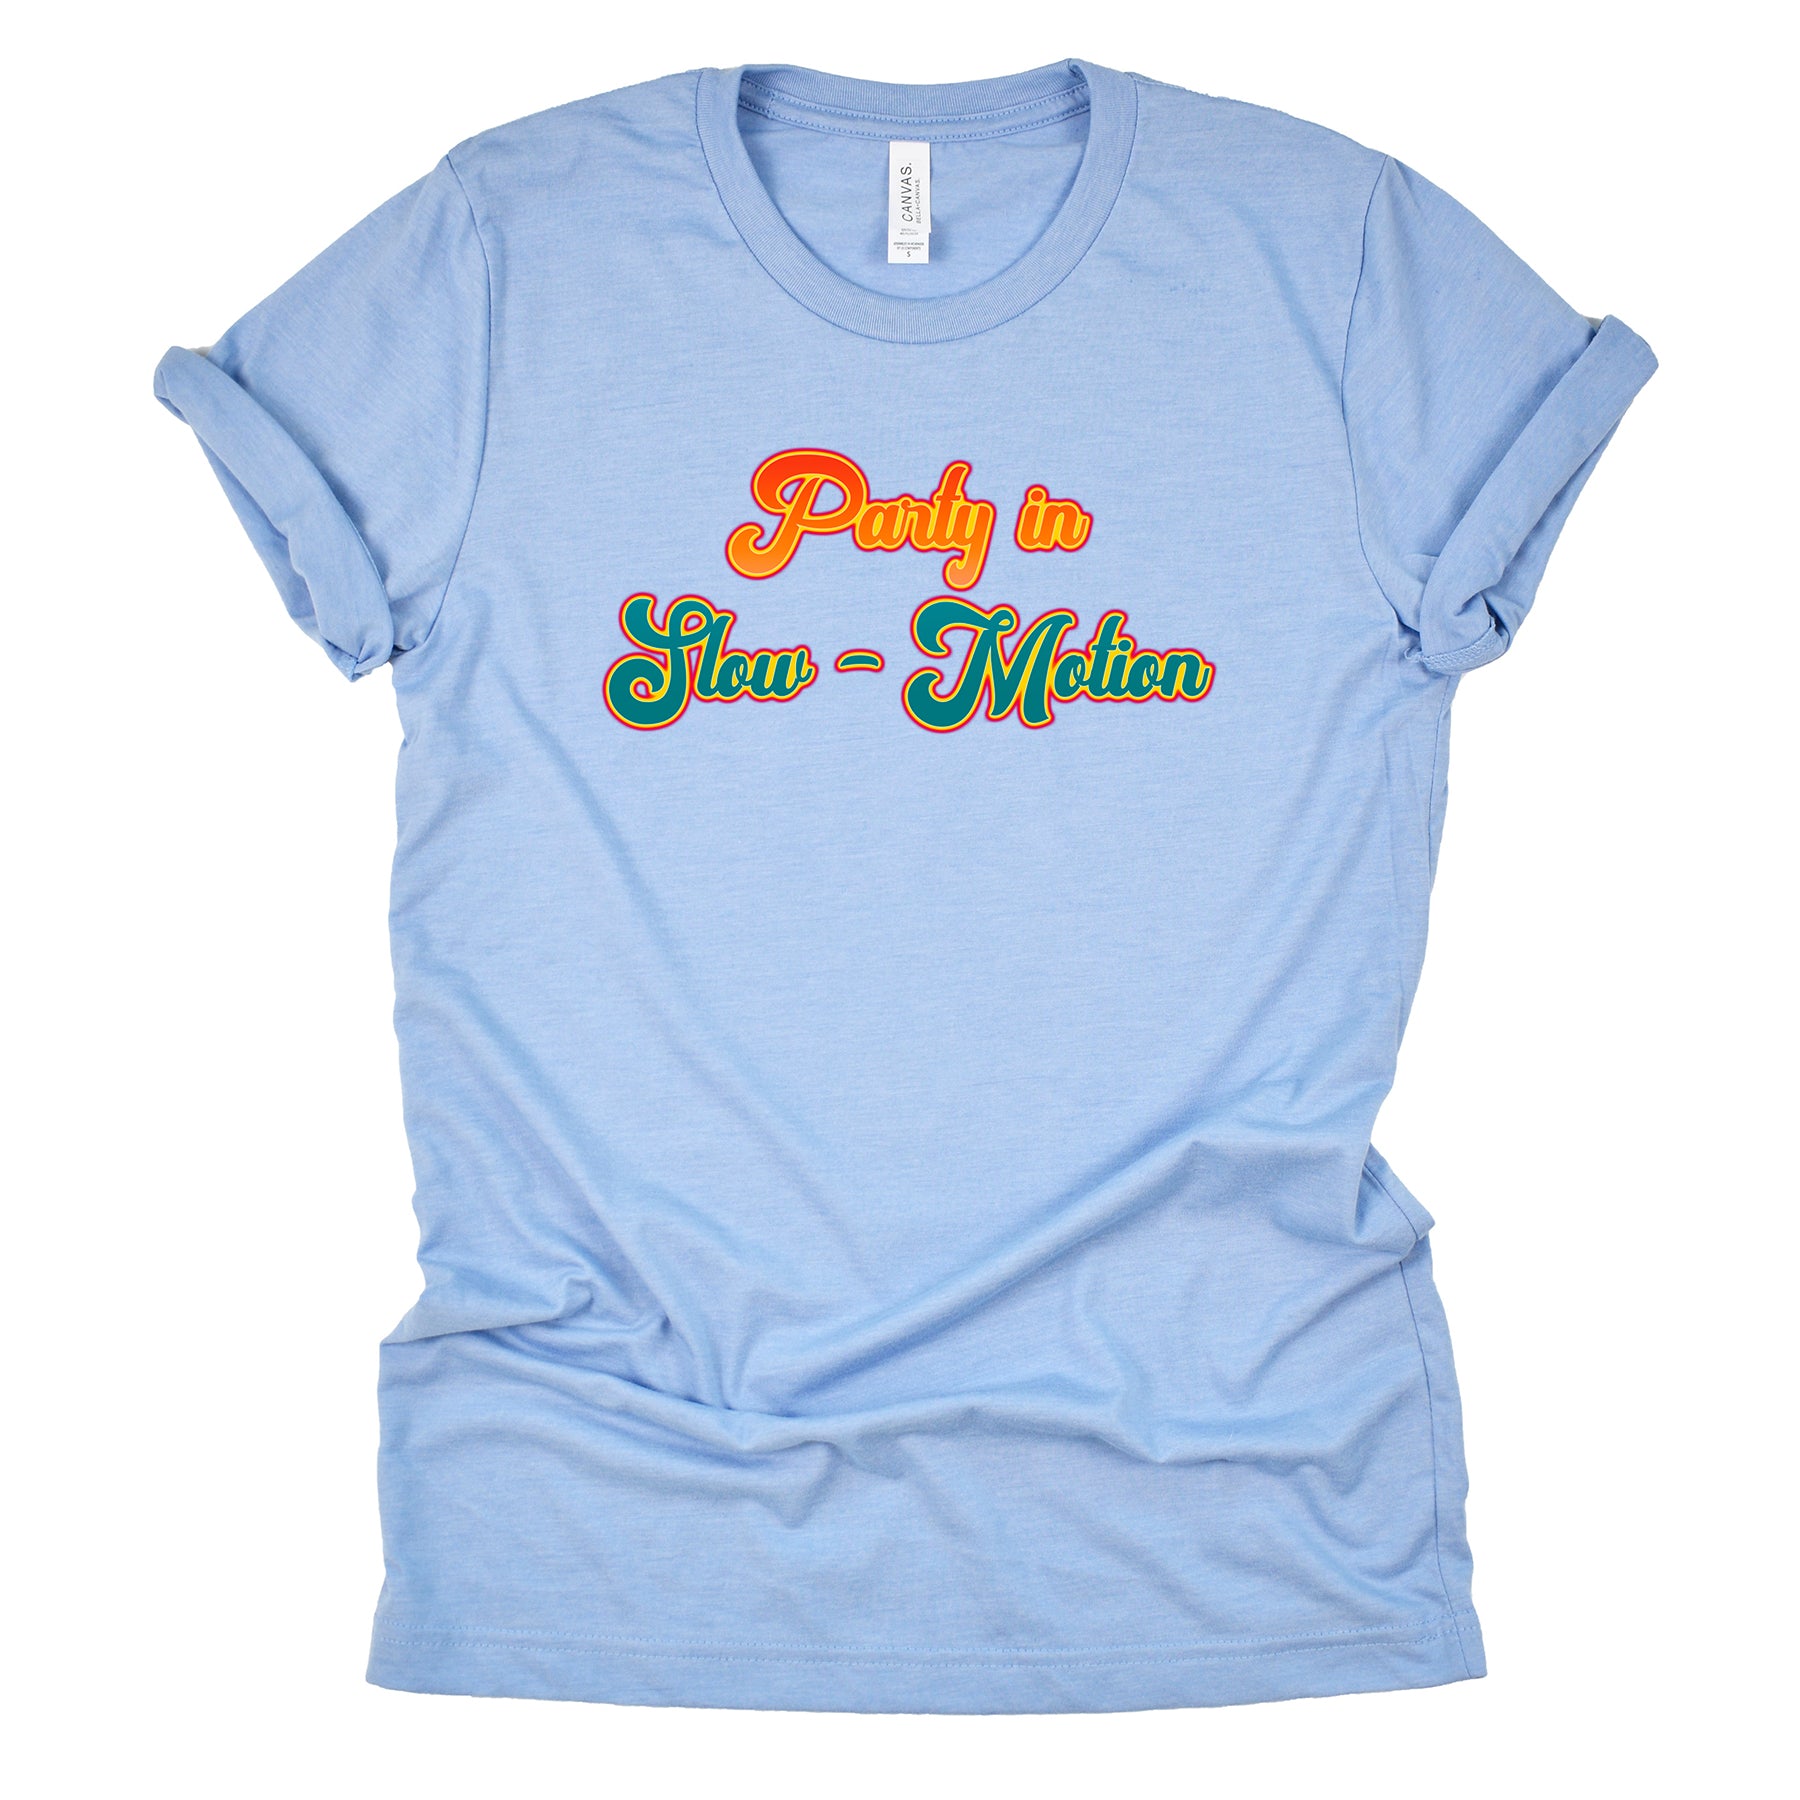 Party in Slow Motion - Unisex Shirt